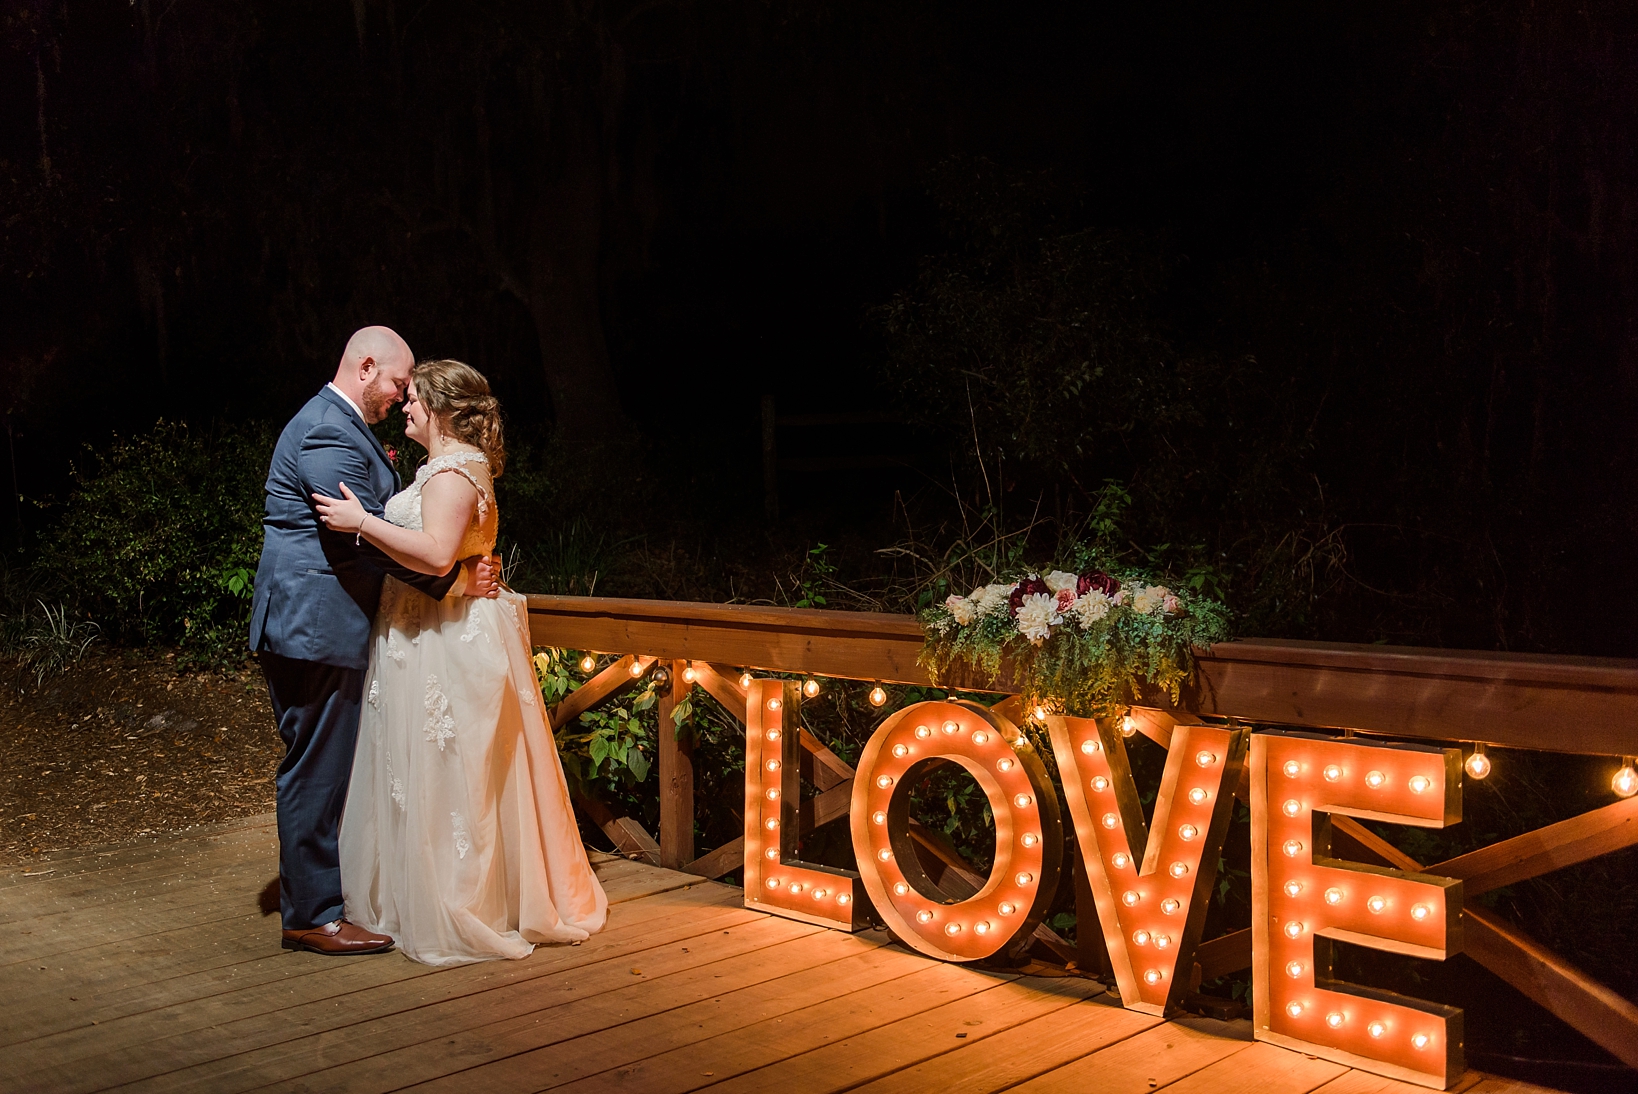 Bride and groom with "Love" sign glowing in the night